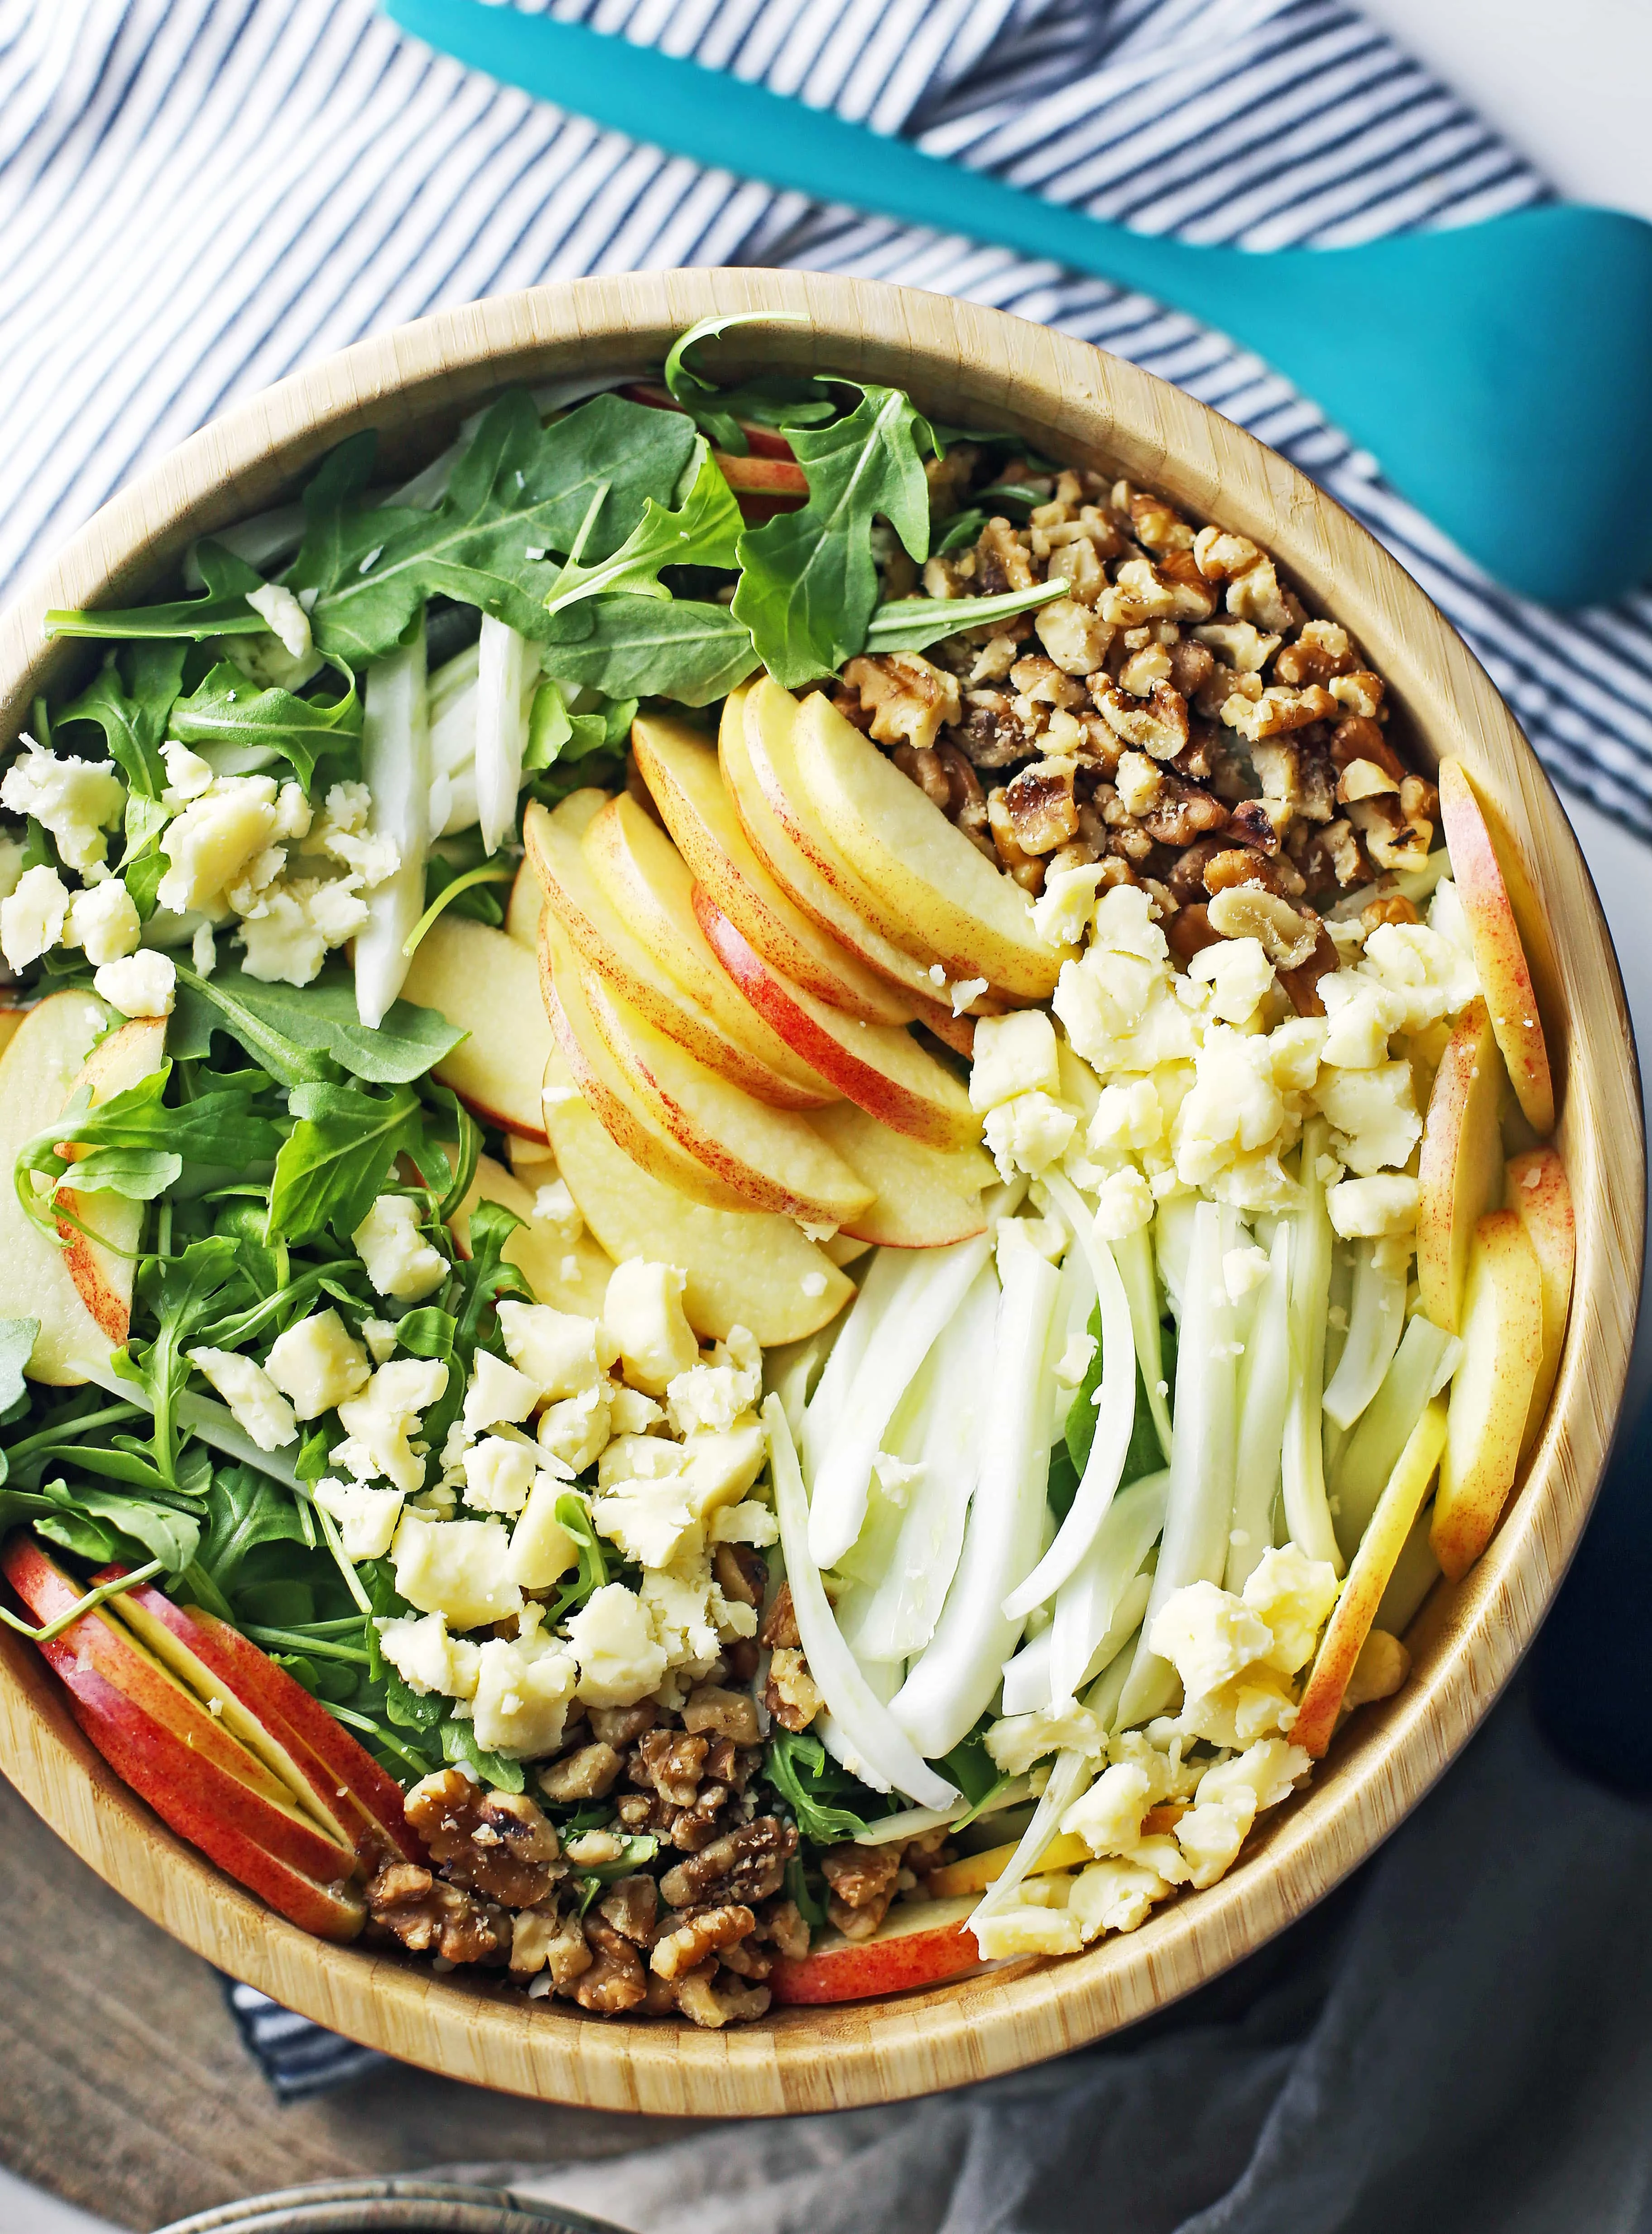 A big wooden bowl containing fennel arugula salad with apples and walnuts.